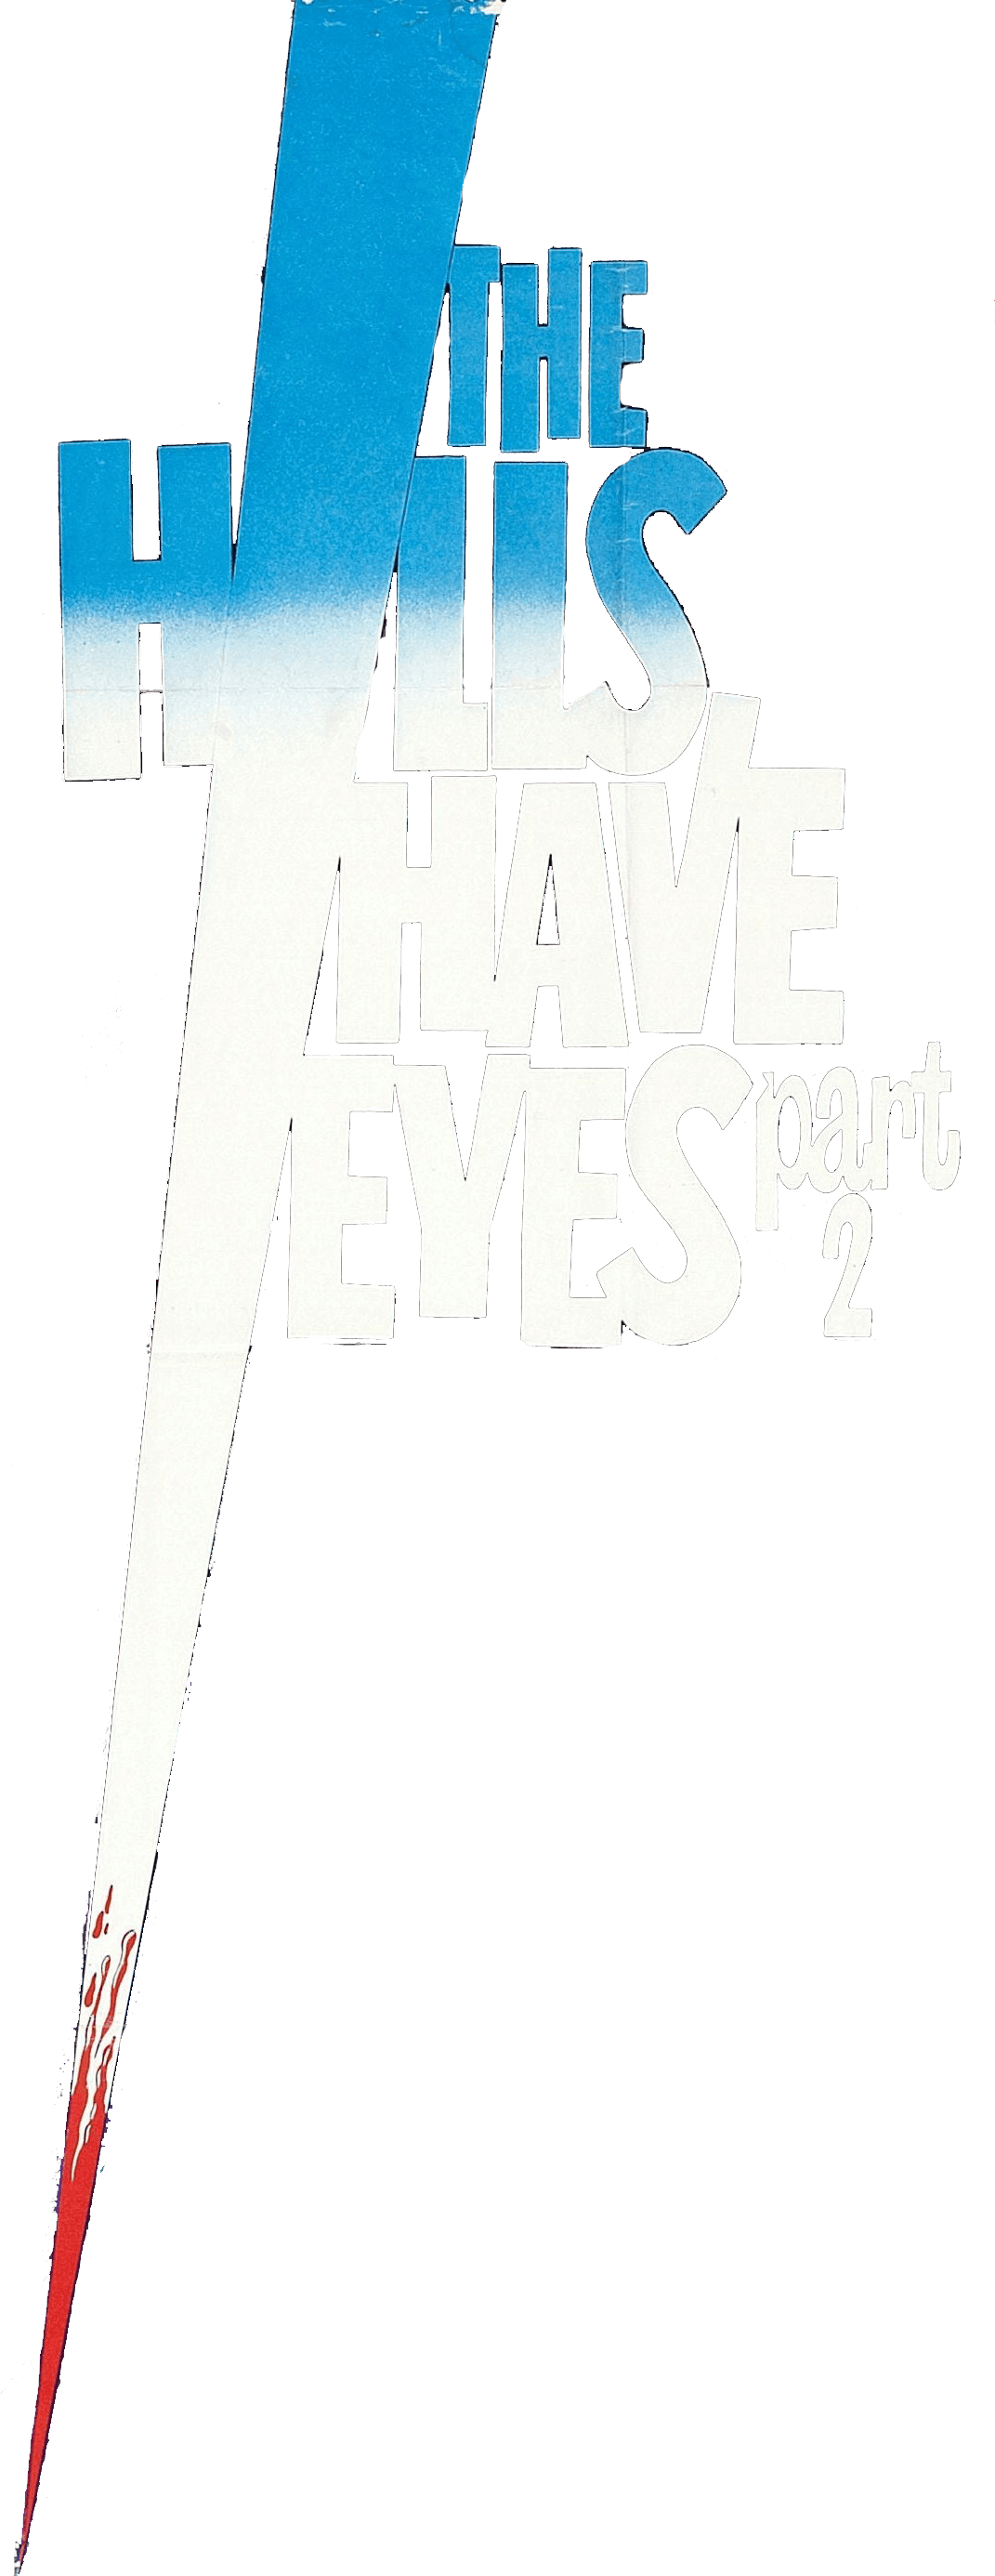 The Hills Have Eyes Part 2 logo